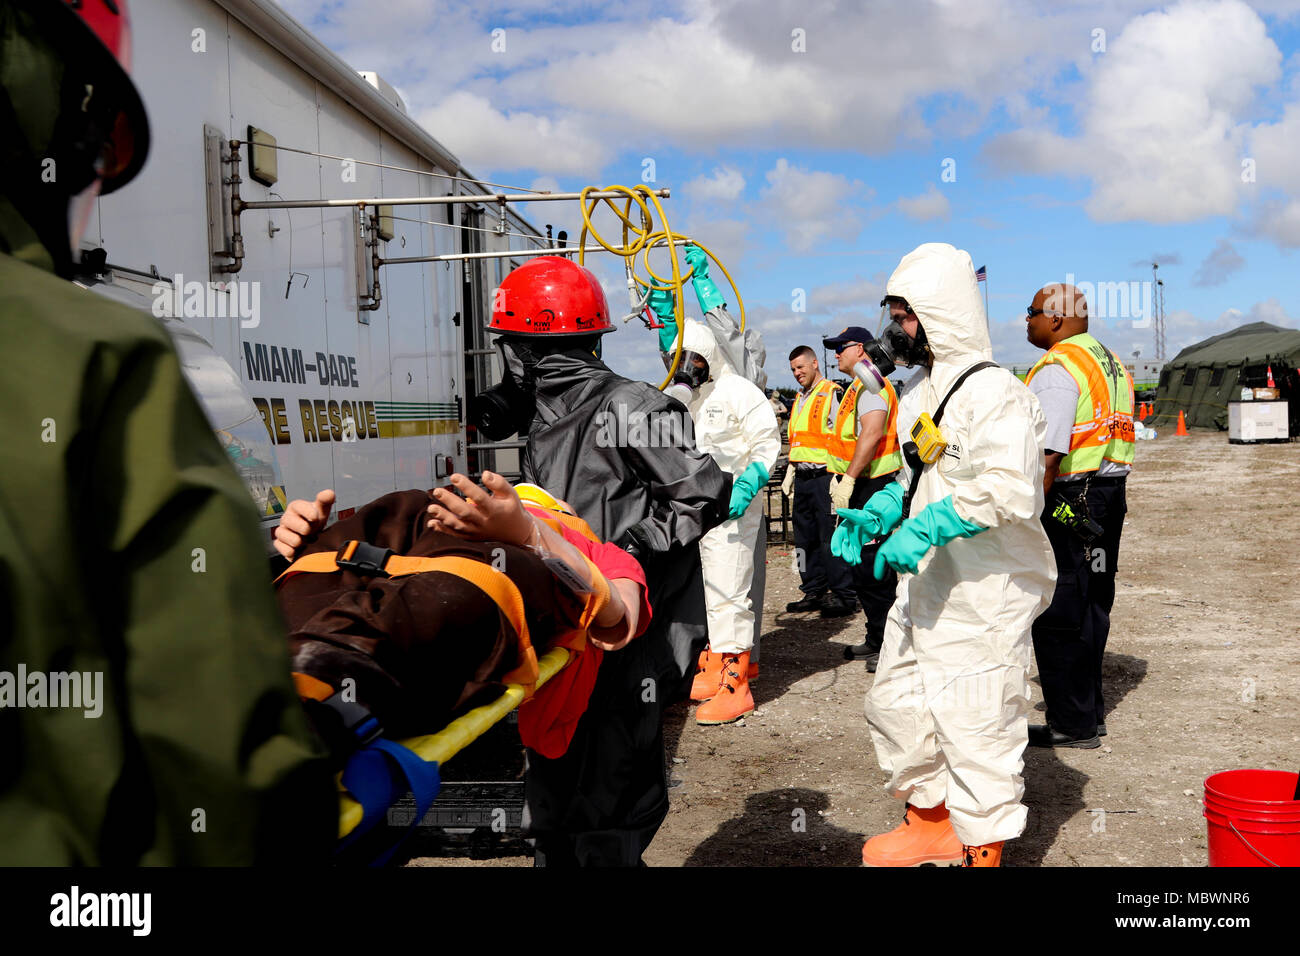 Soldiers assigned to the 414th Chemical Company from Orangeburg, South Carolina and members of the Miami-Dade Fire Department Hazmat team work together to decontaminate a simulated casualty during a Joint Training Exercise hosted by the Homestead-Miami Speedway and Miami-Dade Fire Department in Miami, Florida. Jan. 11, 2018. This JTE focused on building response capabilities and the seamless transition between the local first responders and the follow-on support provided by the National Guard and Active duty soldiers. (U. S. Army Photo by Spc. Samuel Brooks) Stock Photo